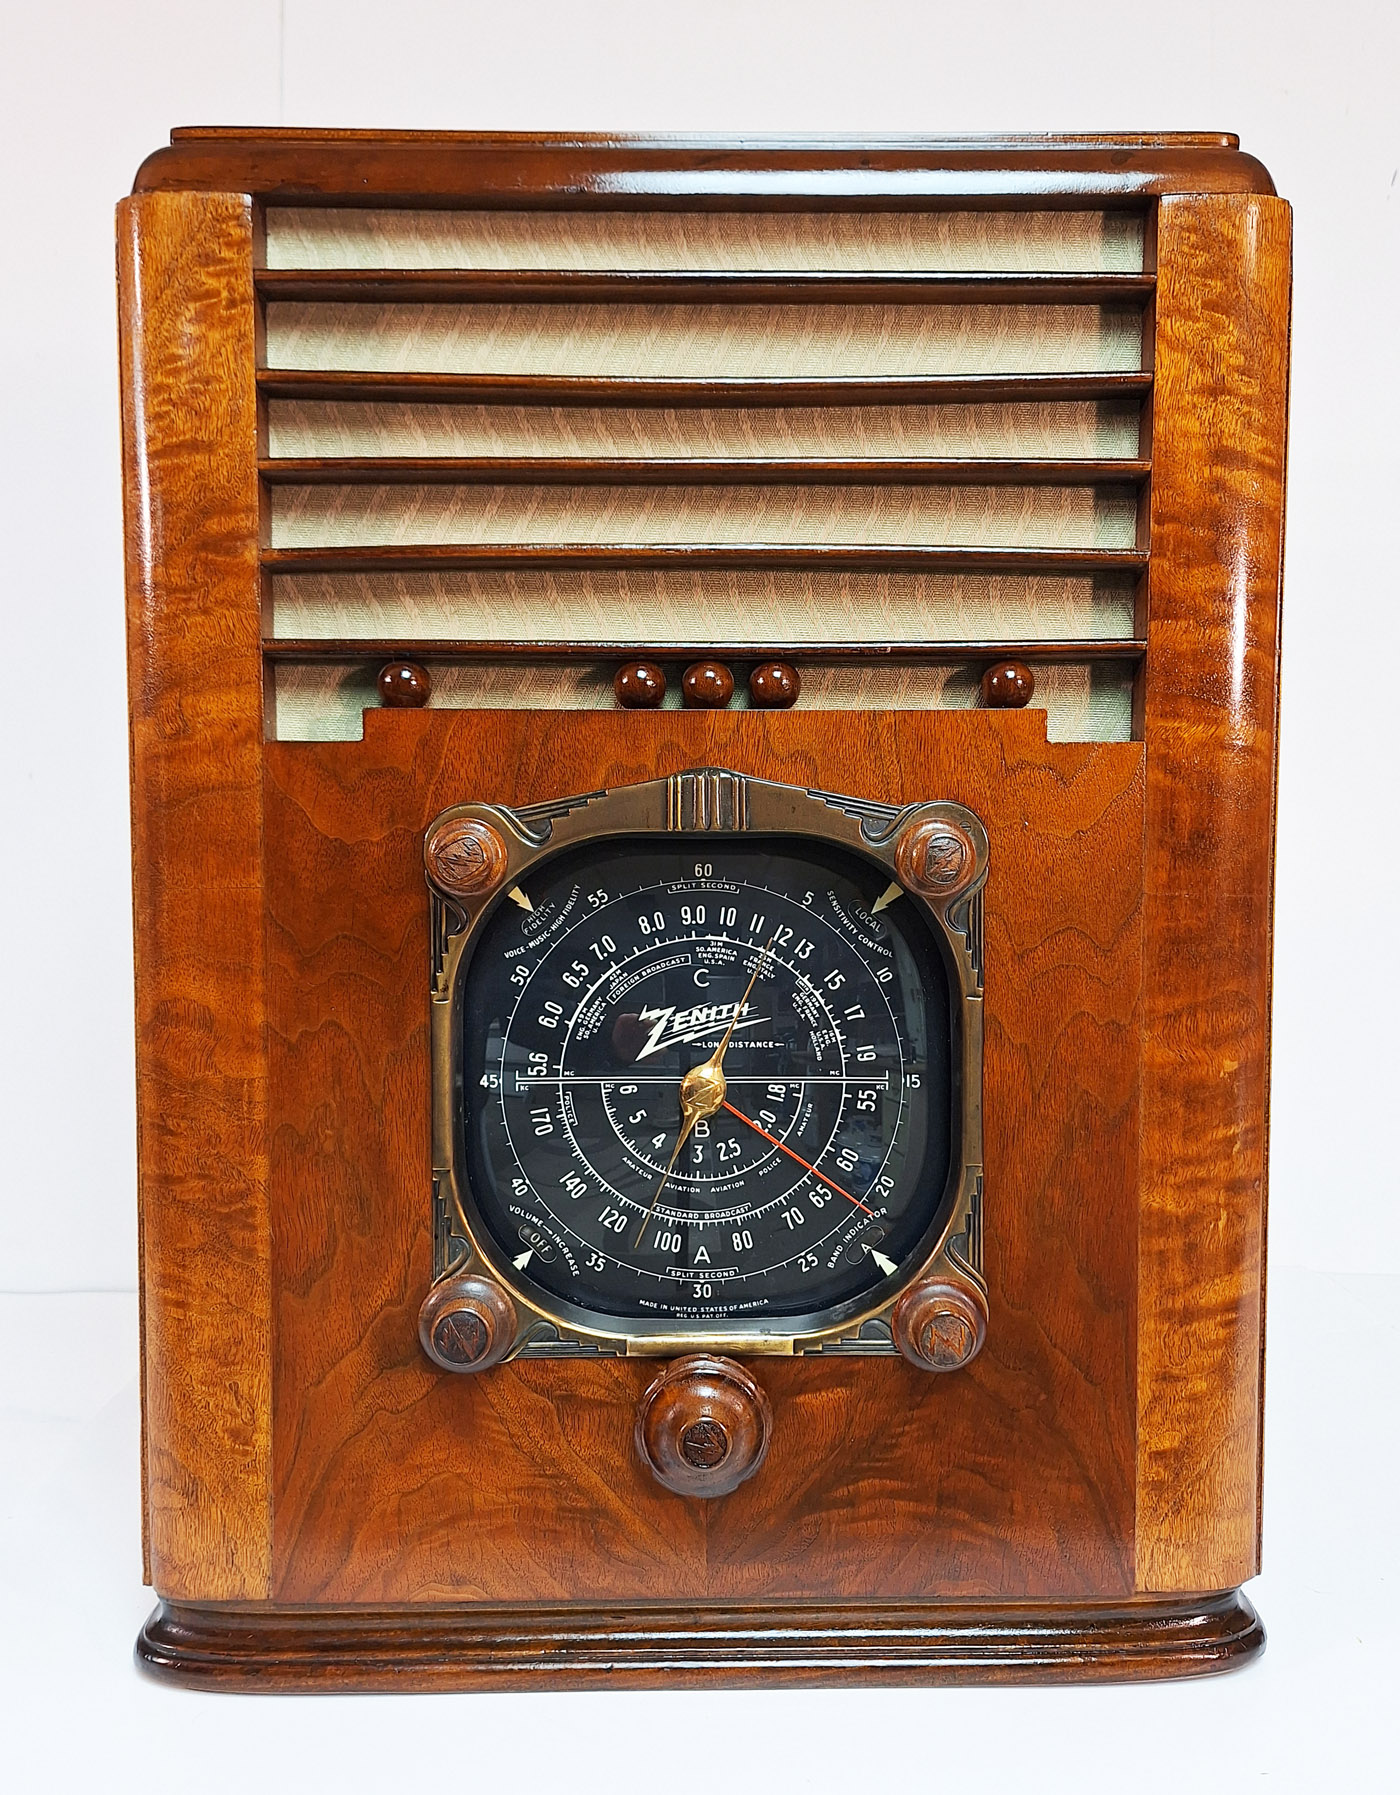 Quality Antique Radios Antique Radio Sales, Restorations, Vintage  Electronic Supplies, Grill Cloth and More